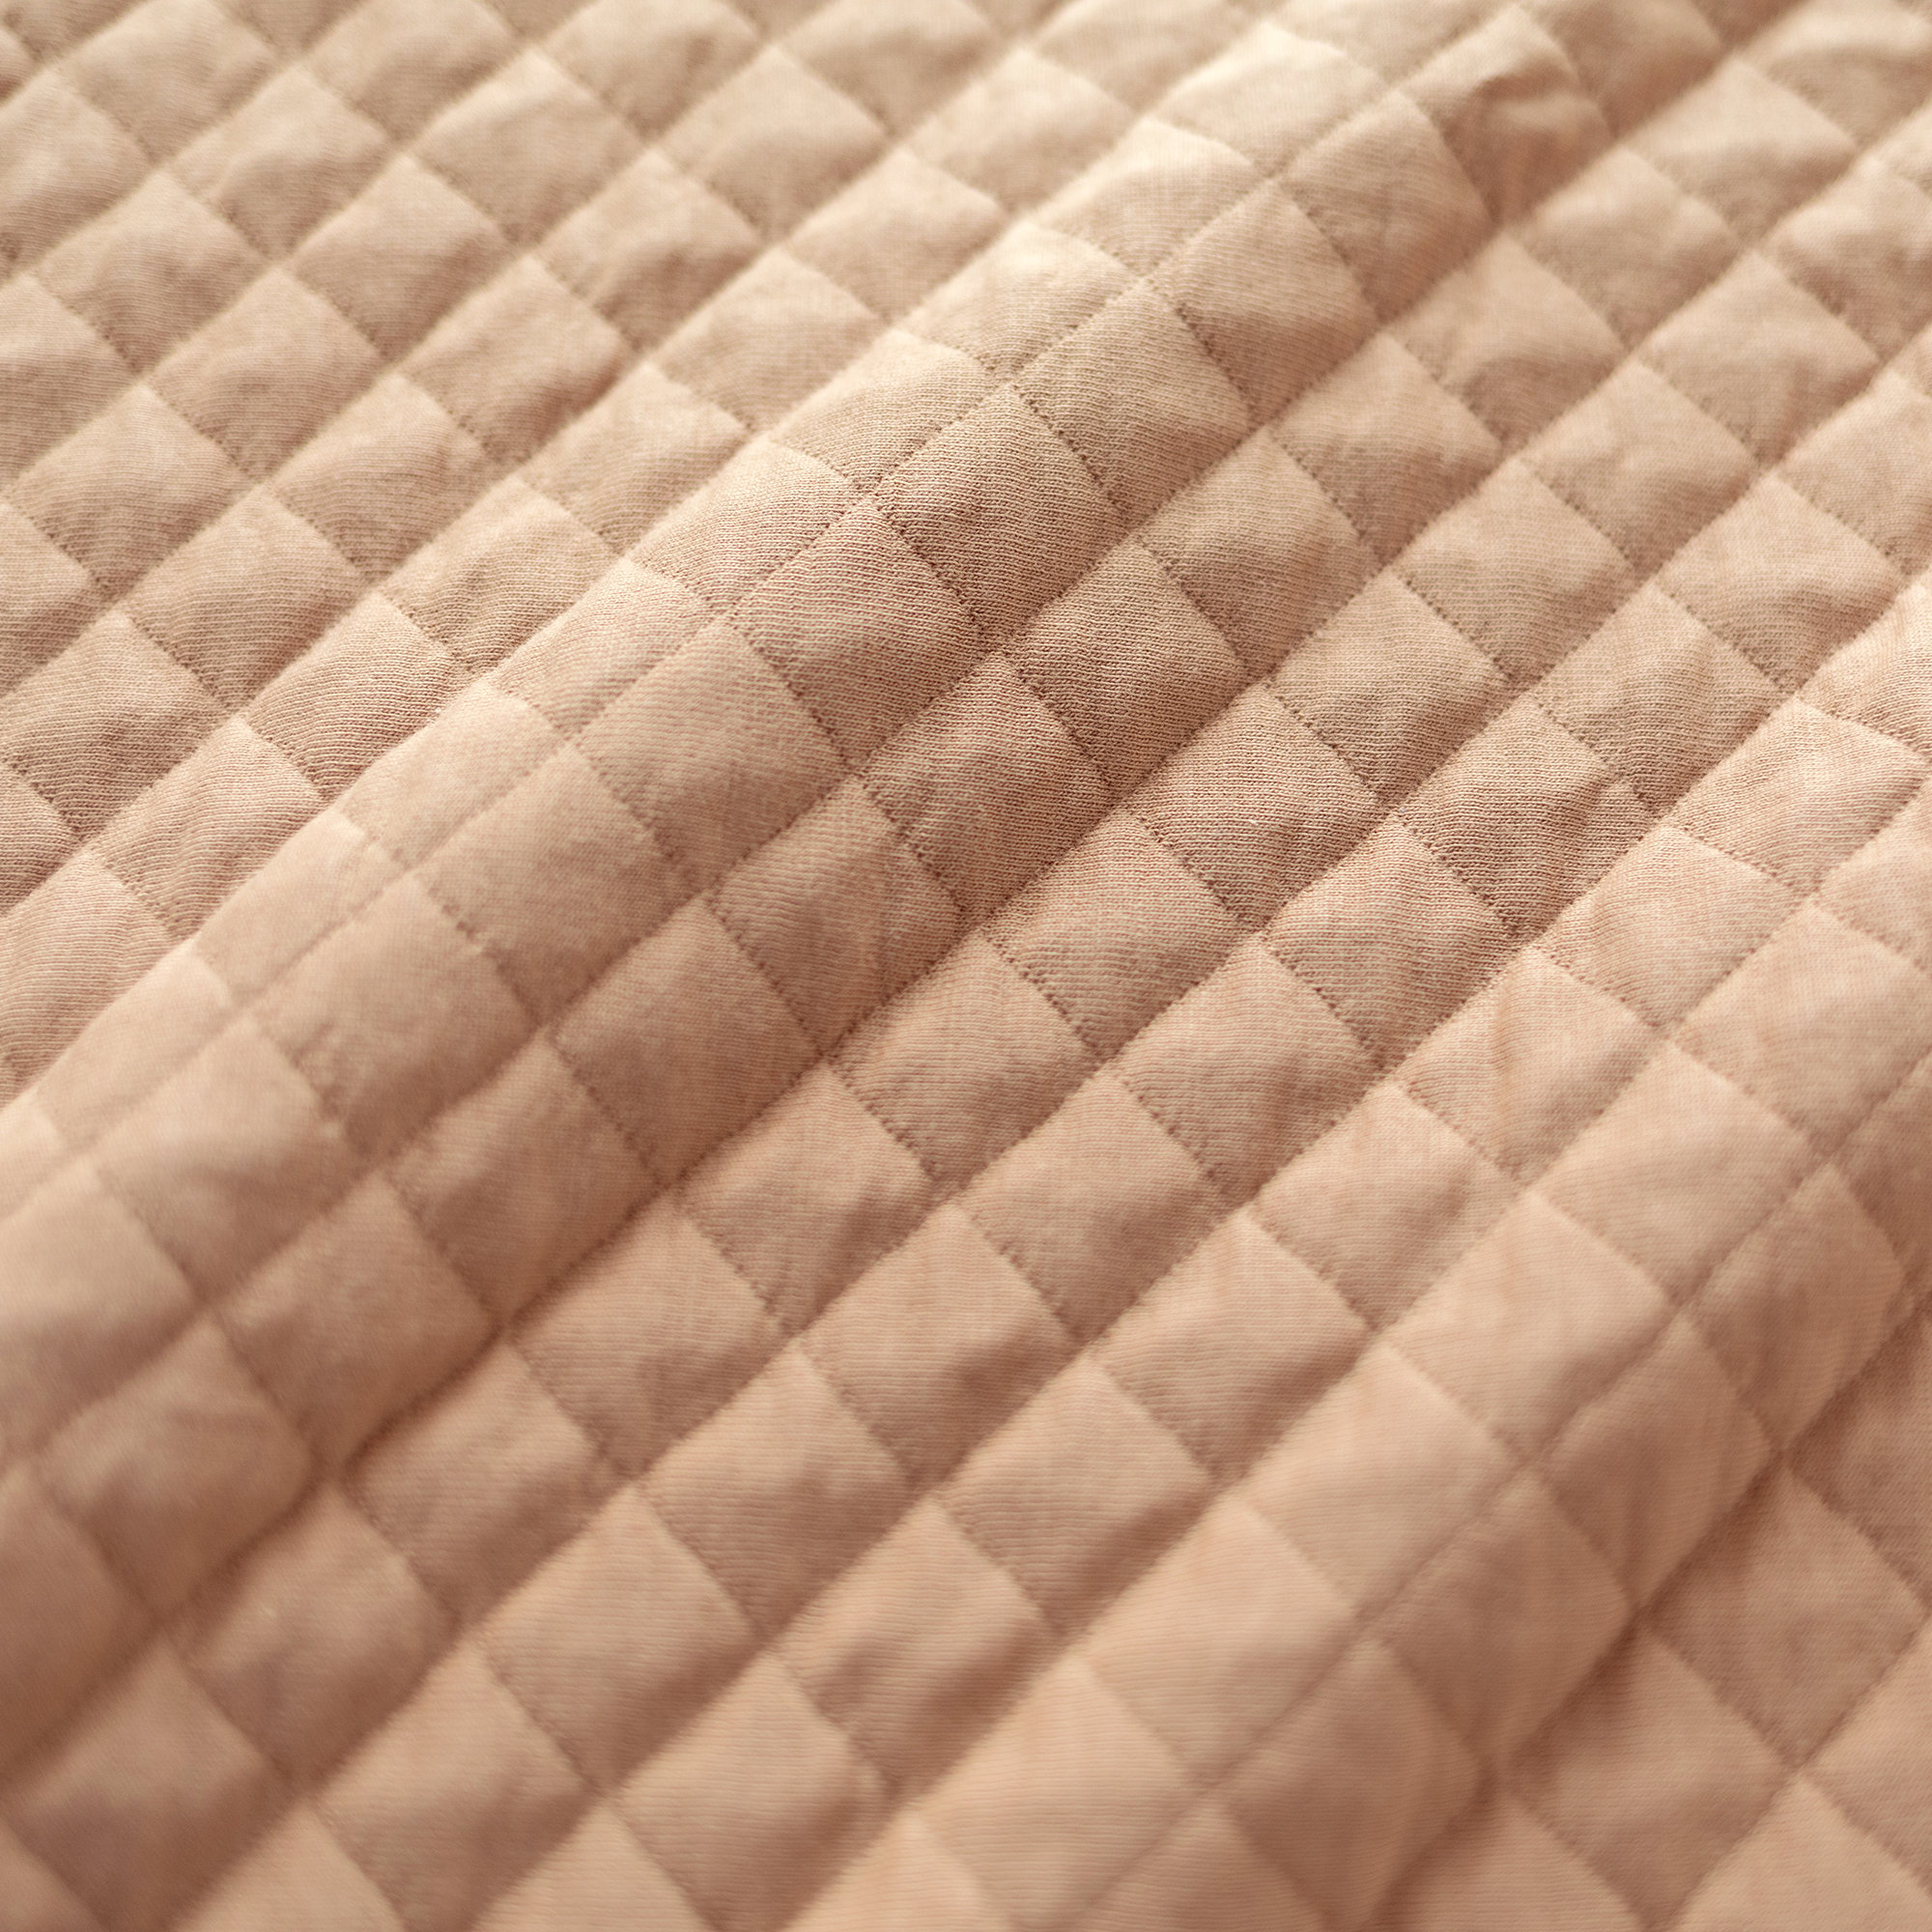 Blanket Pady quilted jersey 75x100cm QUILT Beige tog 1.5